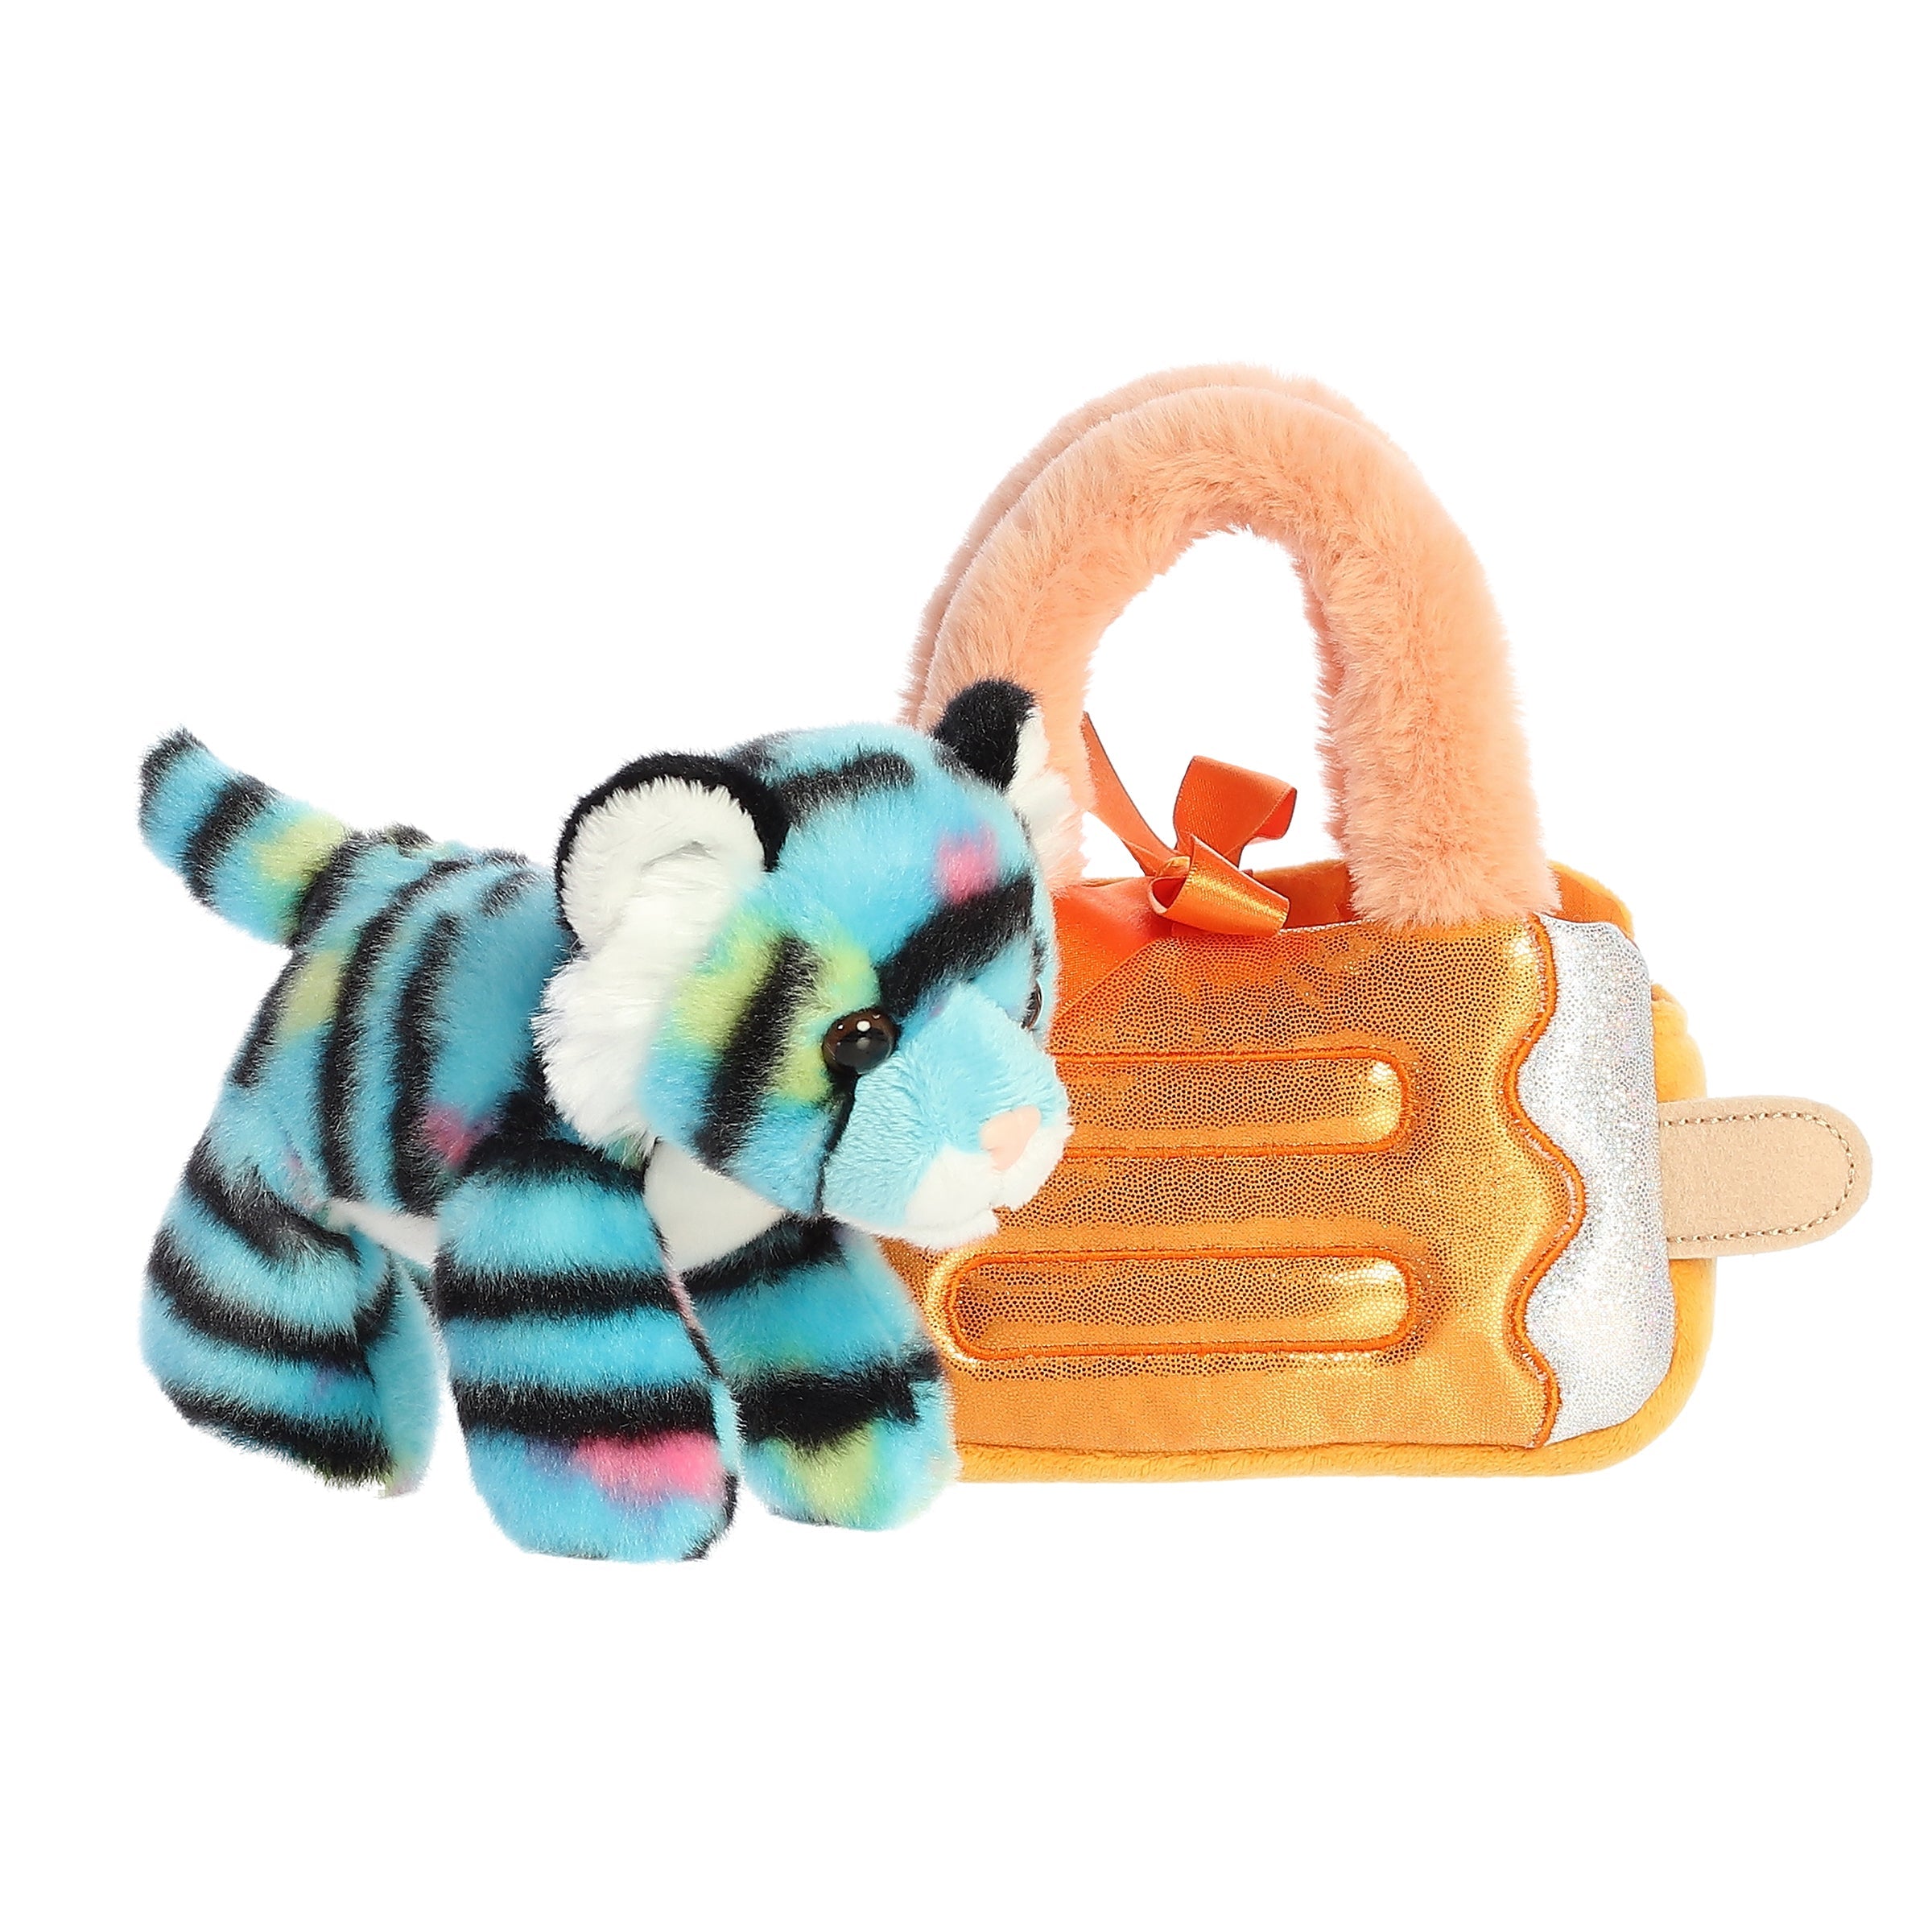 dreamsicle-tiger-8-inch